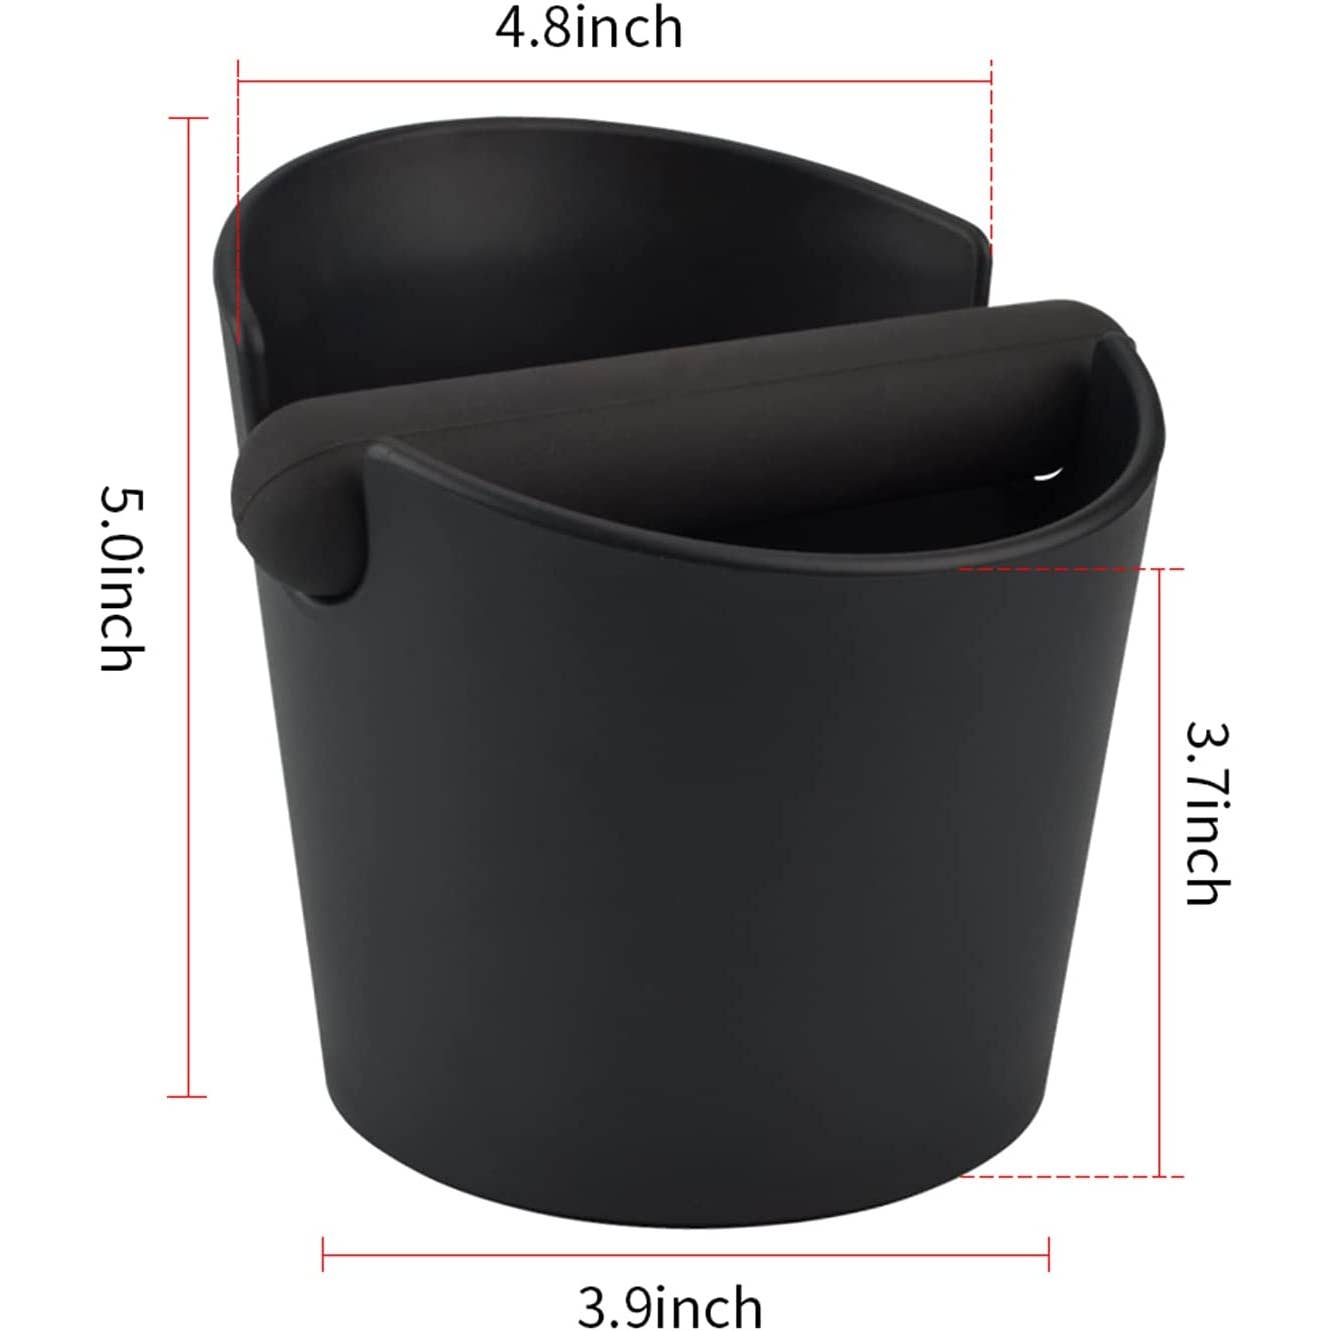 BARISTA Legends Coffee Knock Box 4.8 Inch With Removable Knock Bar